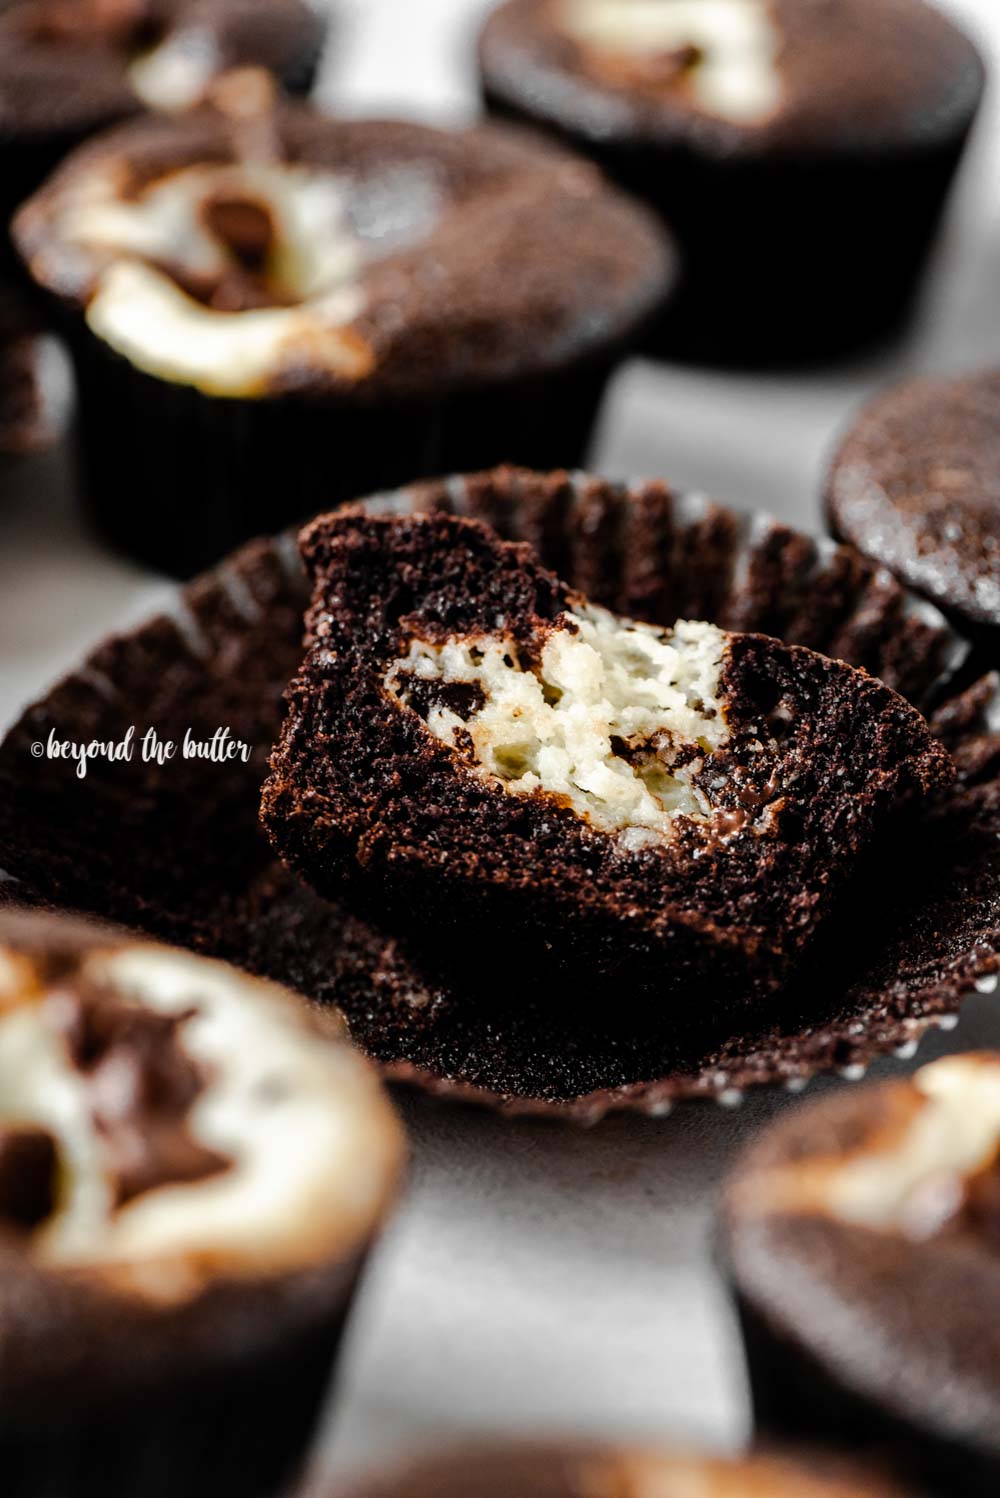 Close up angled image of black bottom cupcakes randomly placed with a half sliced cupcake on gray background | All Images © Beyond the Butter™